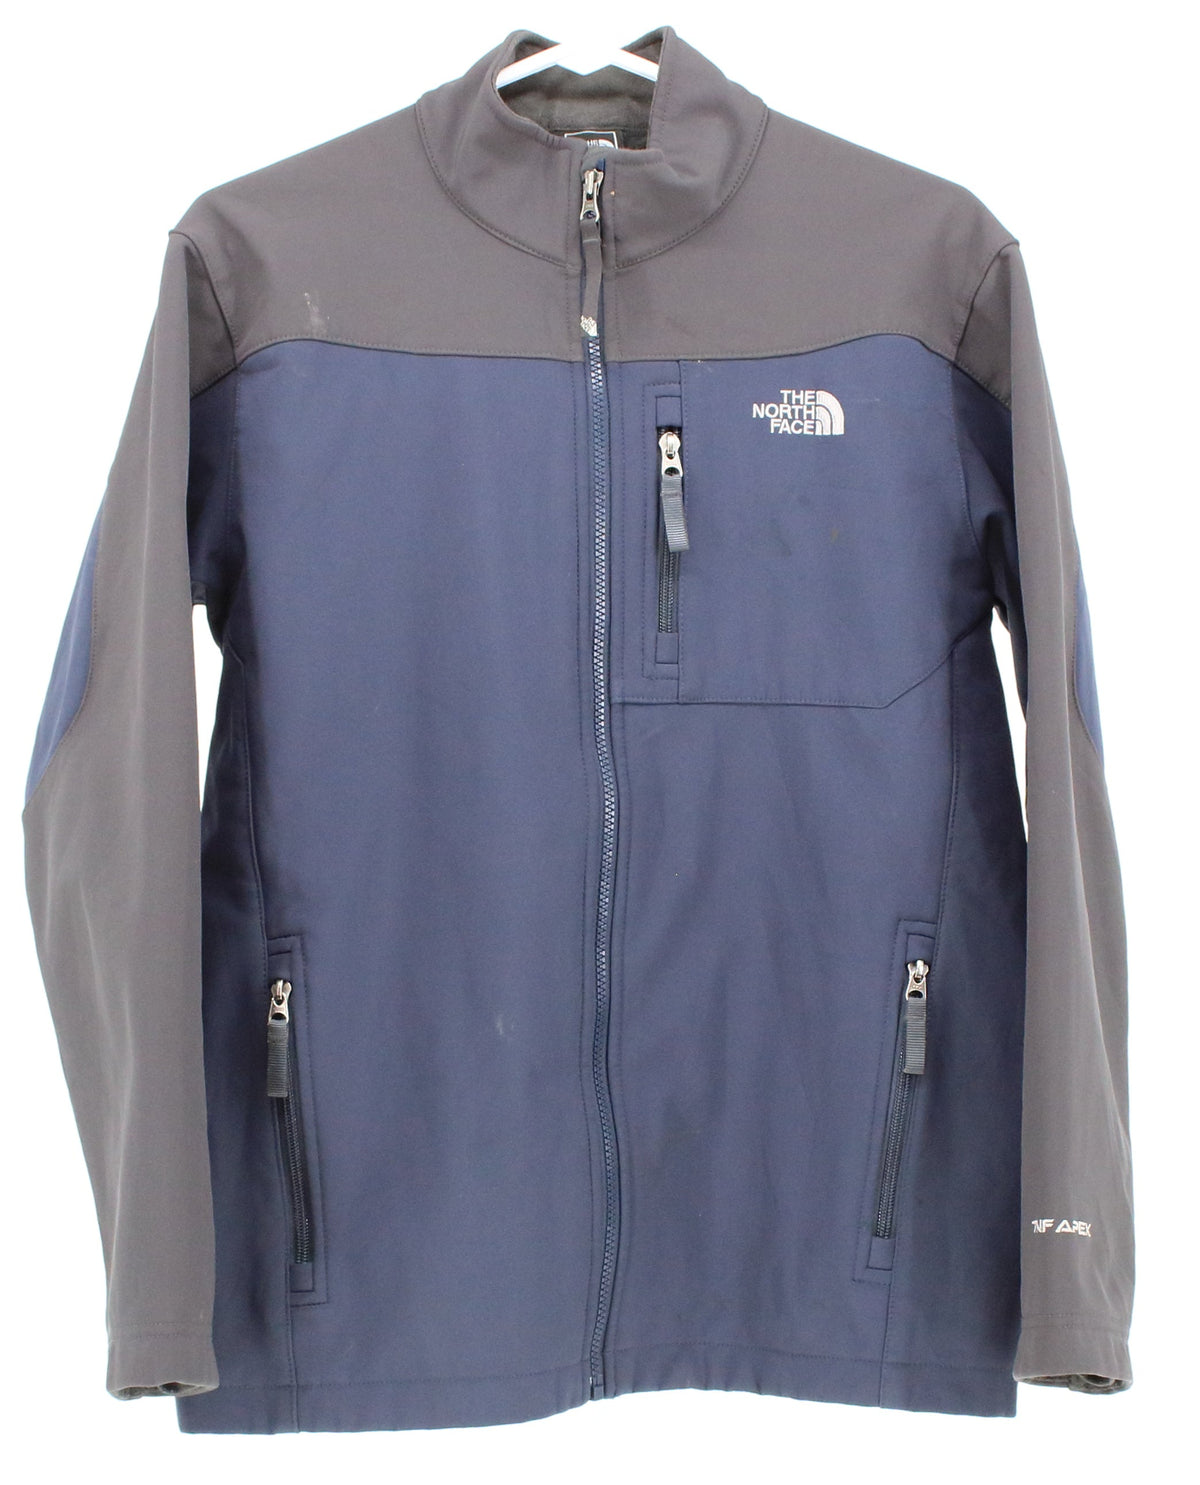 The North Face TNF Apex Dark Grey and Blue Boy's Jacket